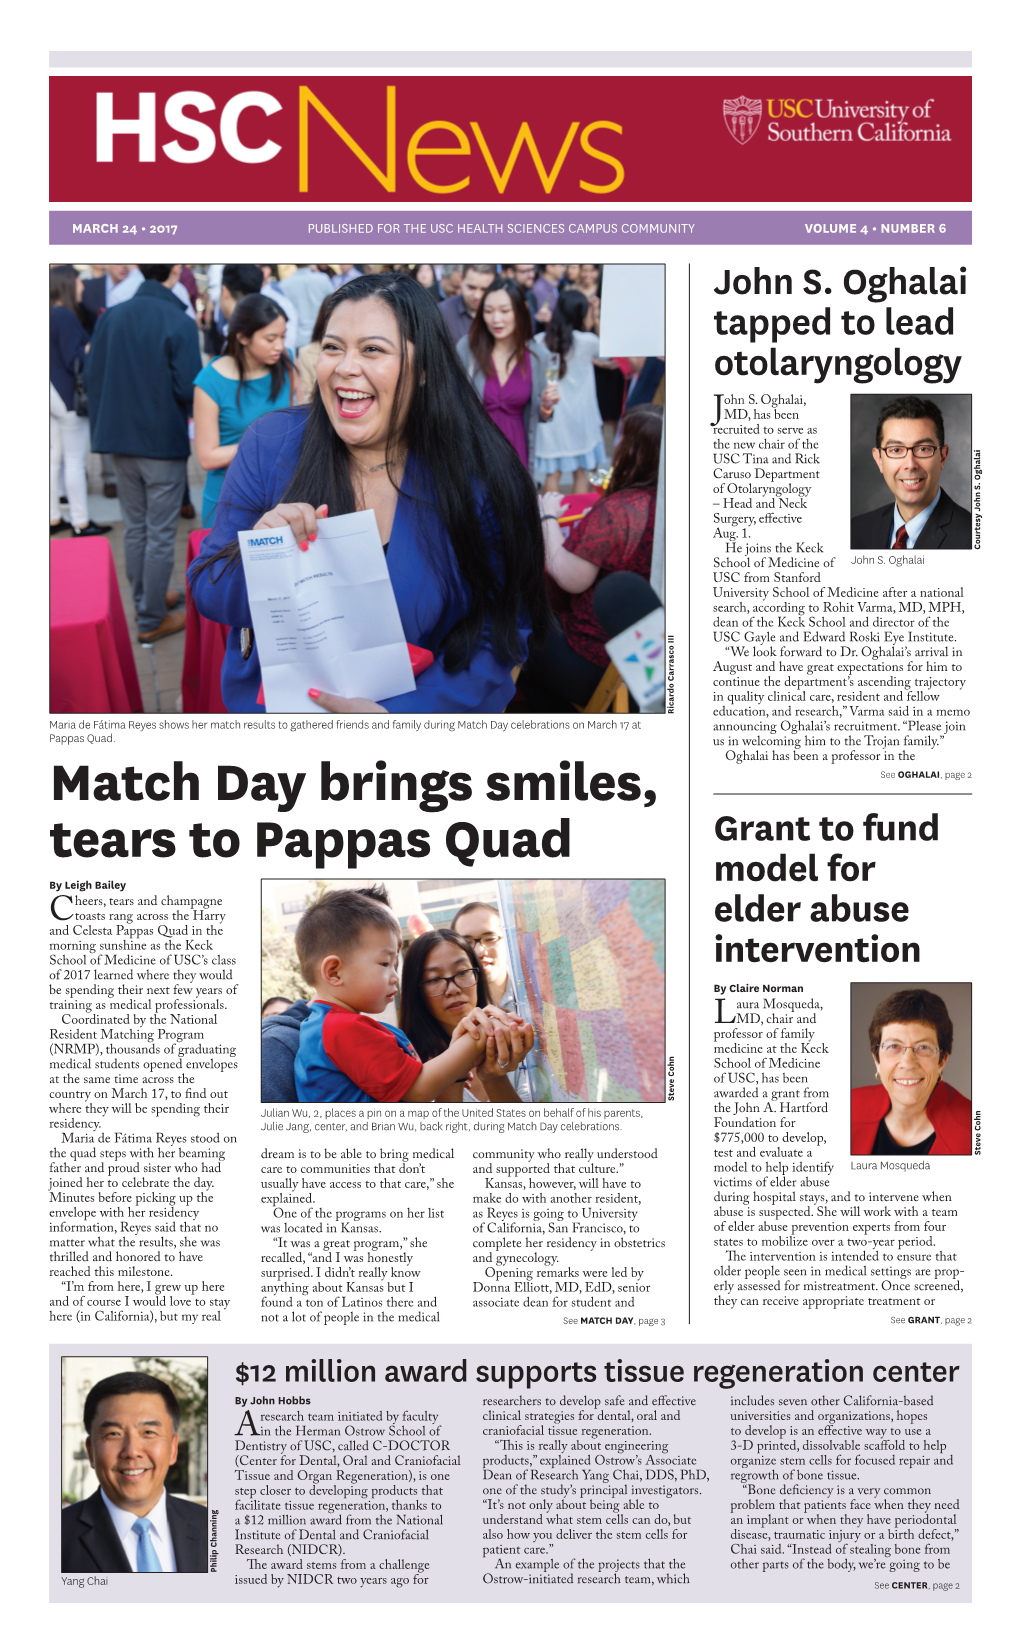 Match Day Brings Smiles, Tears to Pappas Quad